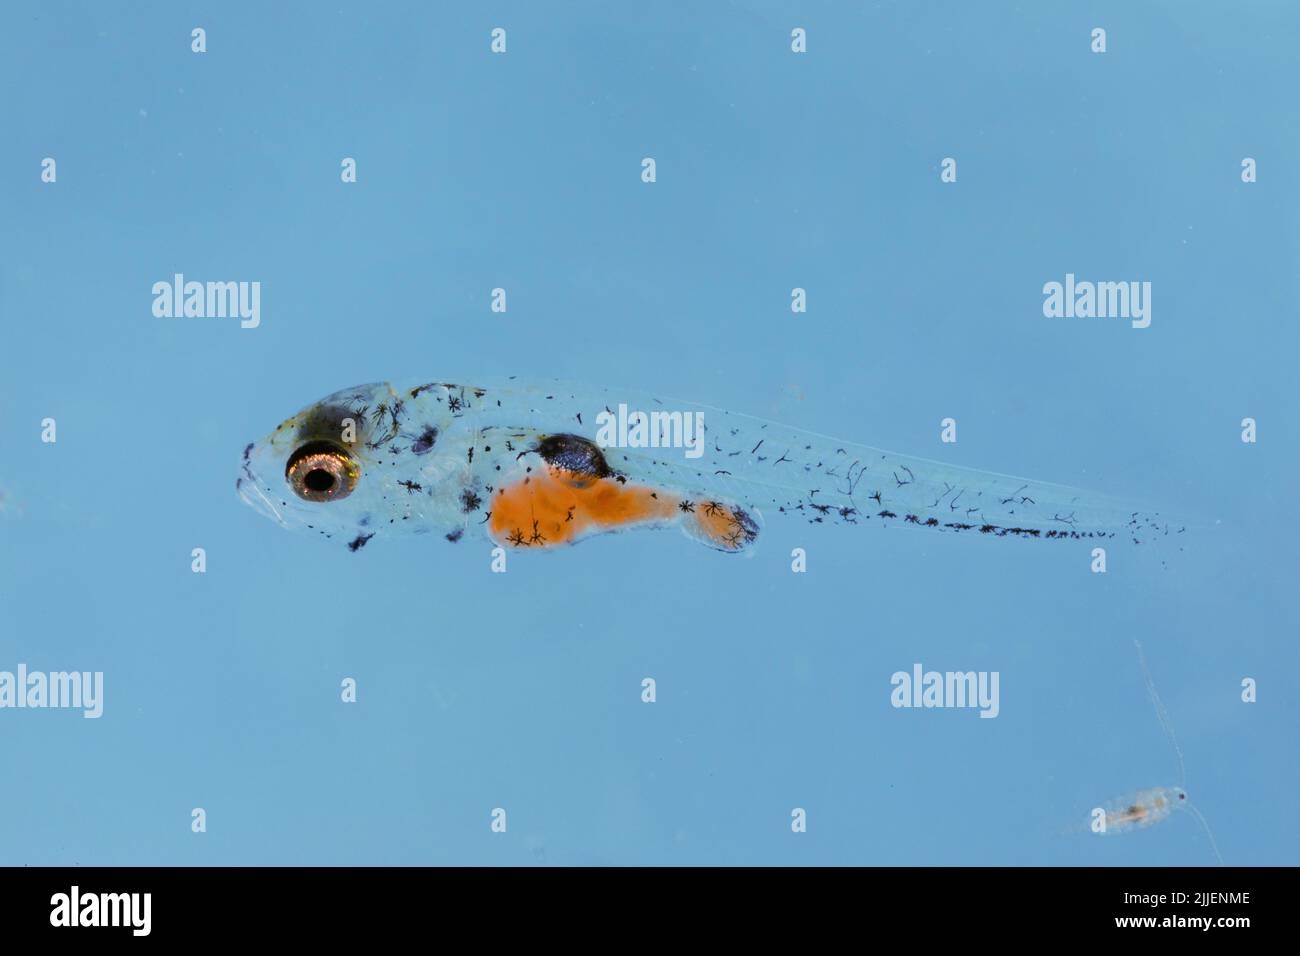 pike-perch, zander (Stizostedion lucioperca, Sander lucioperca), larva three weeks after egg deposition at water temperature of 21 degree Celsius , Stock Photo